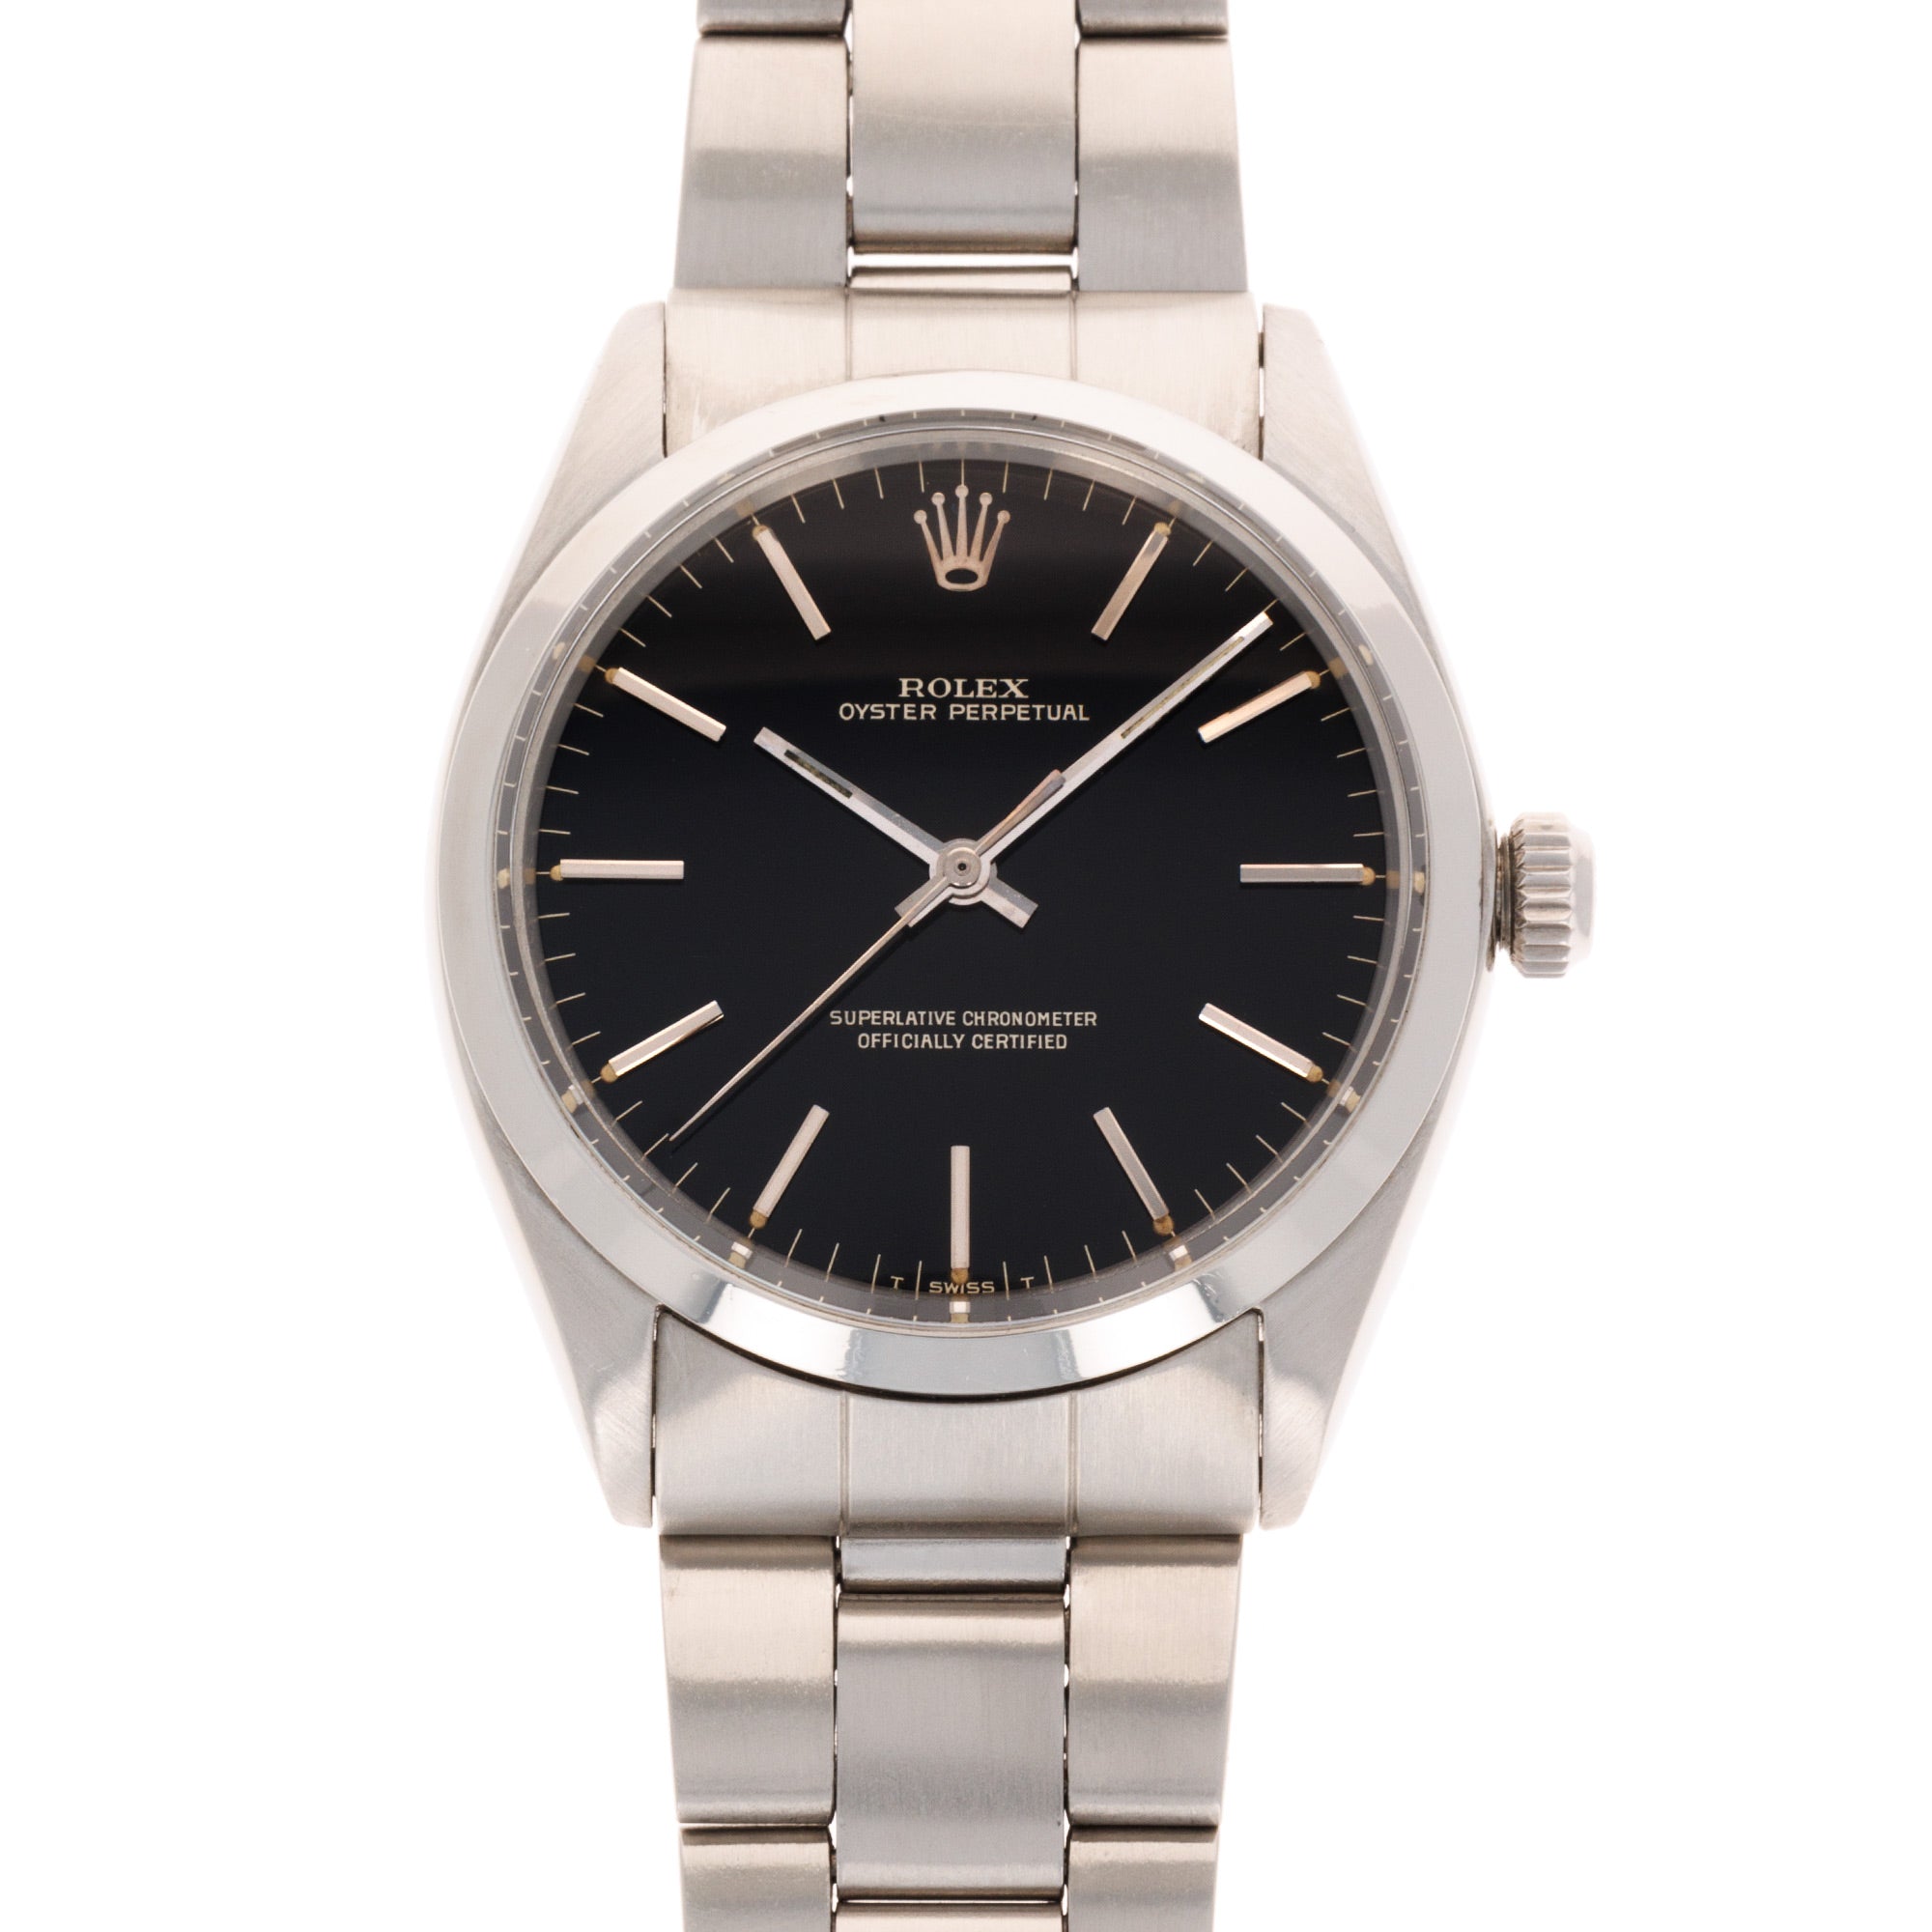 Rolex - Rolex Steel Oyster Perpetual Ref. 1002 with Gilt Dial - The Keystone Watches